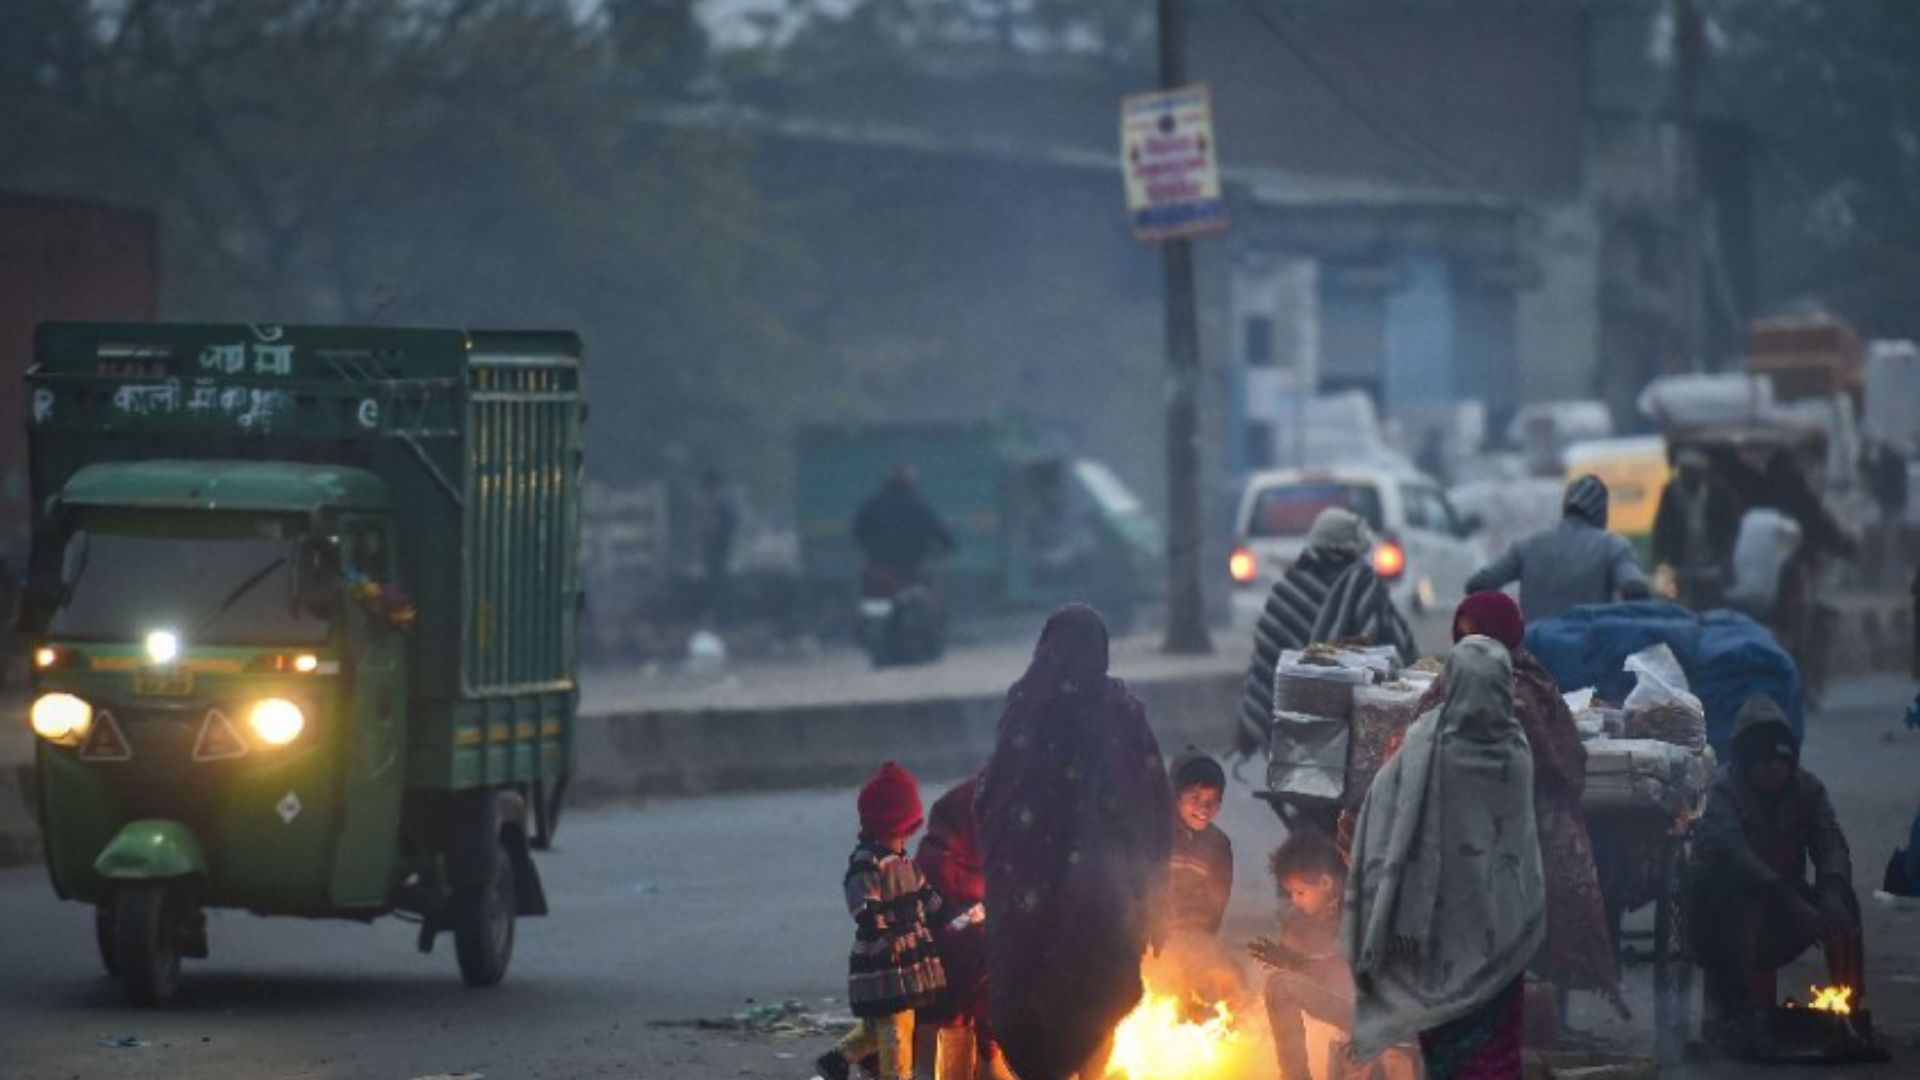 Cold Weather Persists in Delhi; Residents Gather Around Bonfires for Warmth